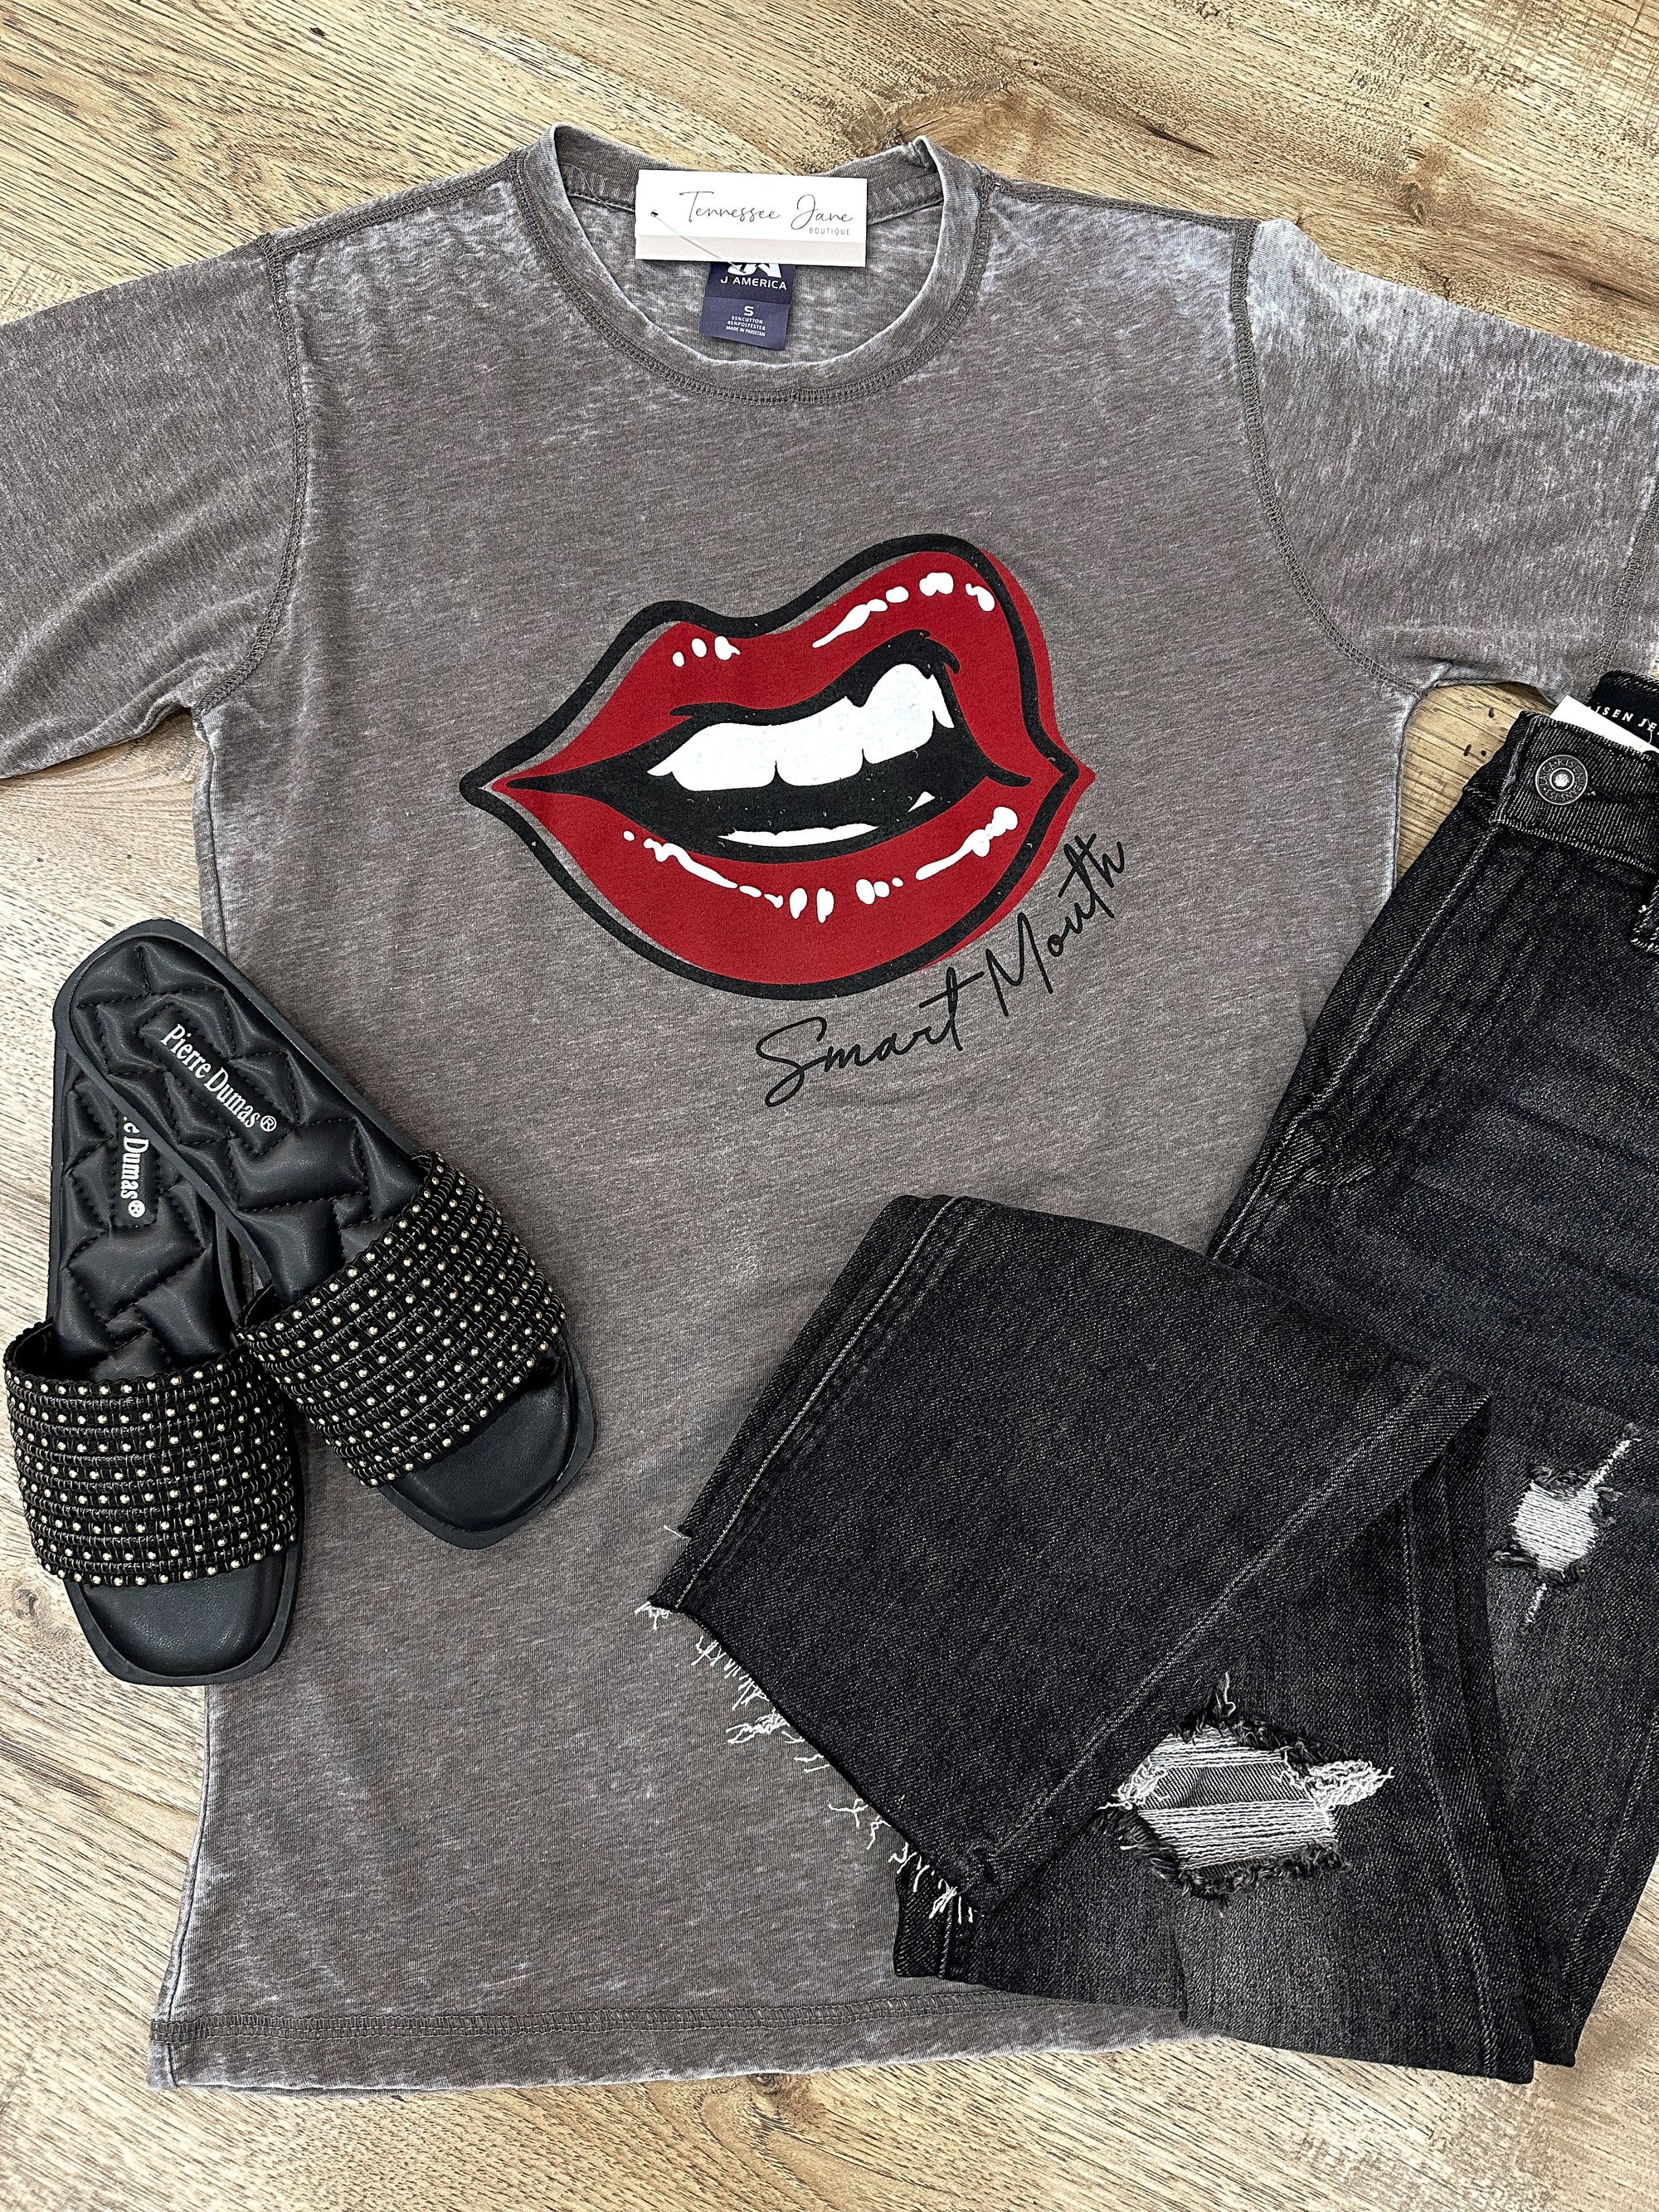 Smart Mouth Acid Washed Tee